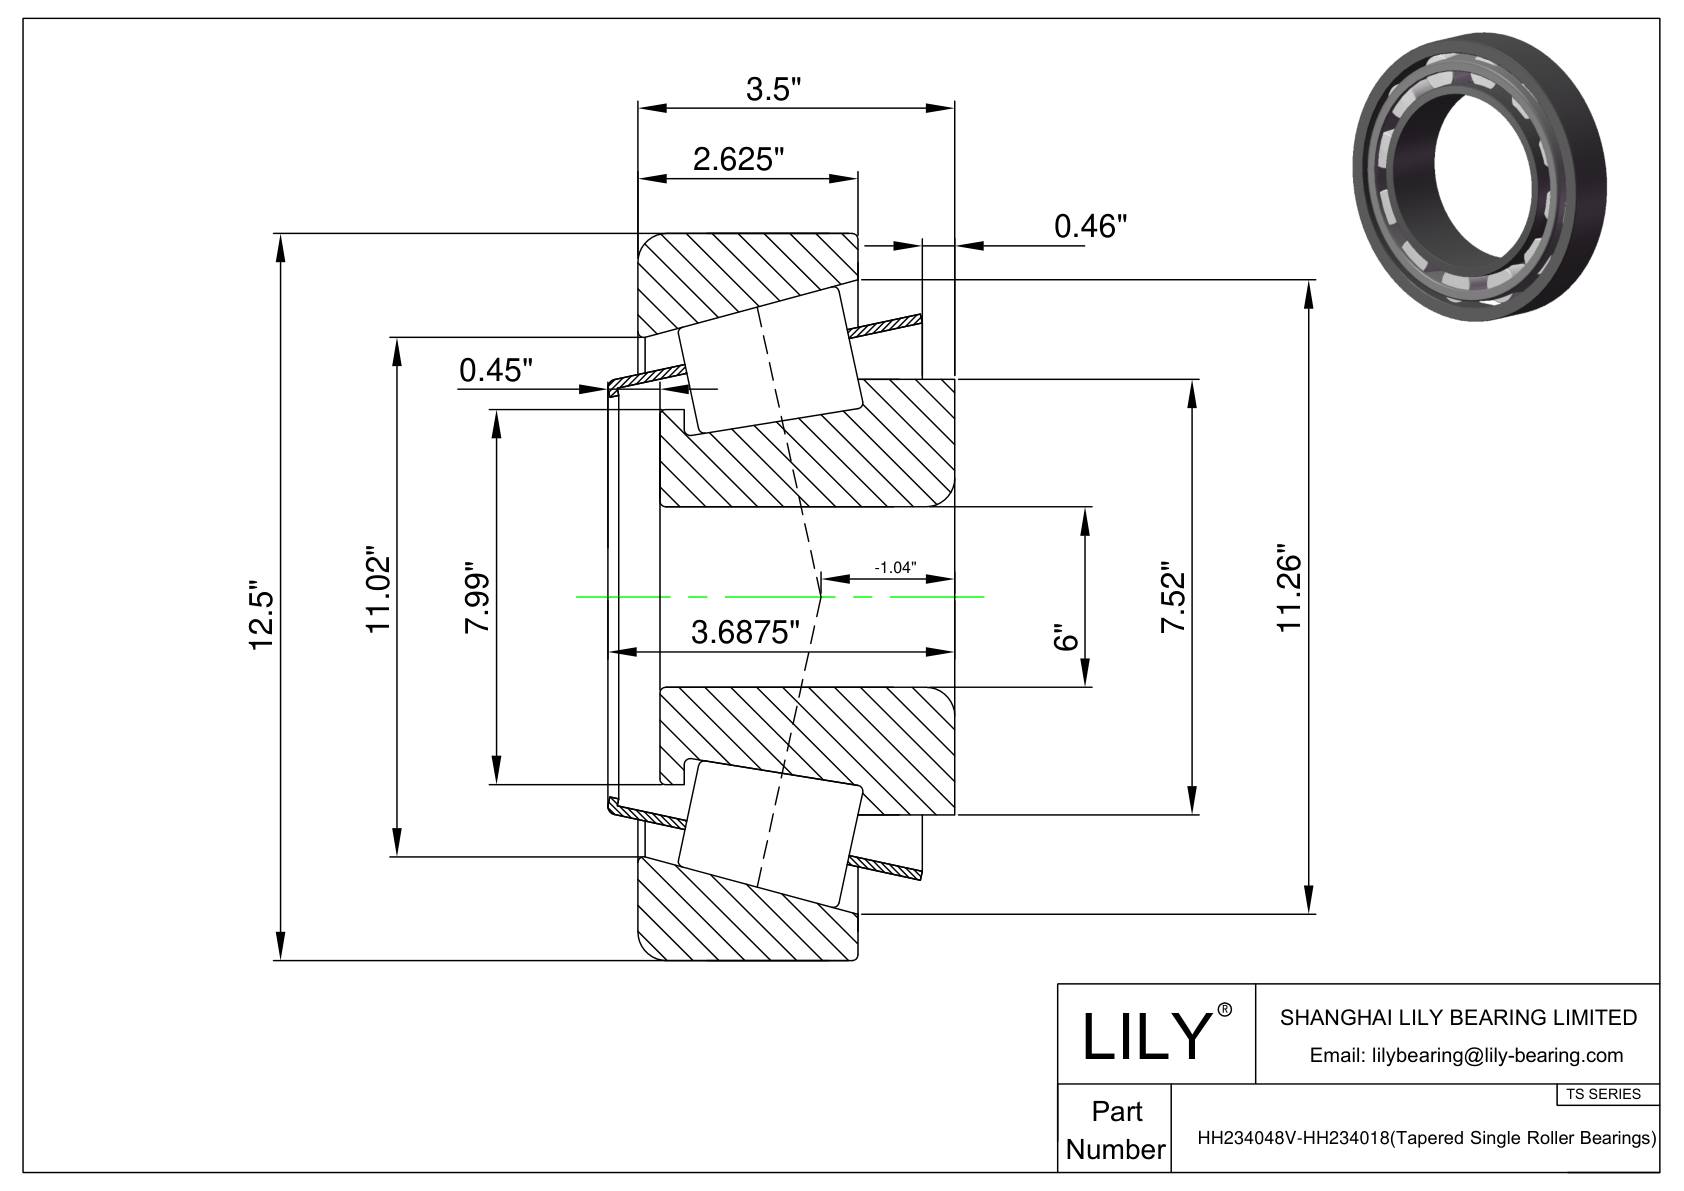 HH234048V-HH234018 TS (Tapered Single Roller Bearings) (Imperial) cad drawing